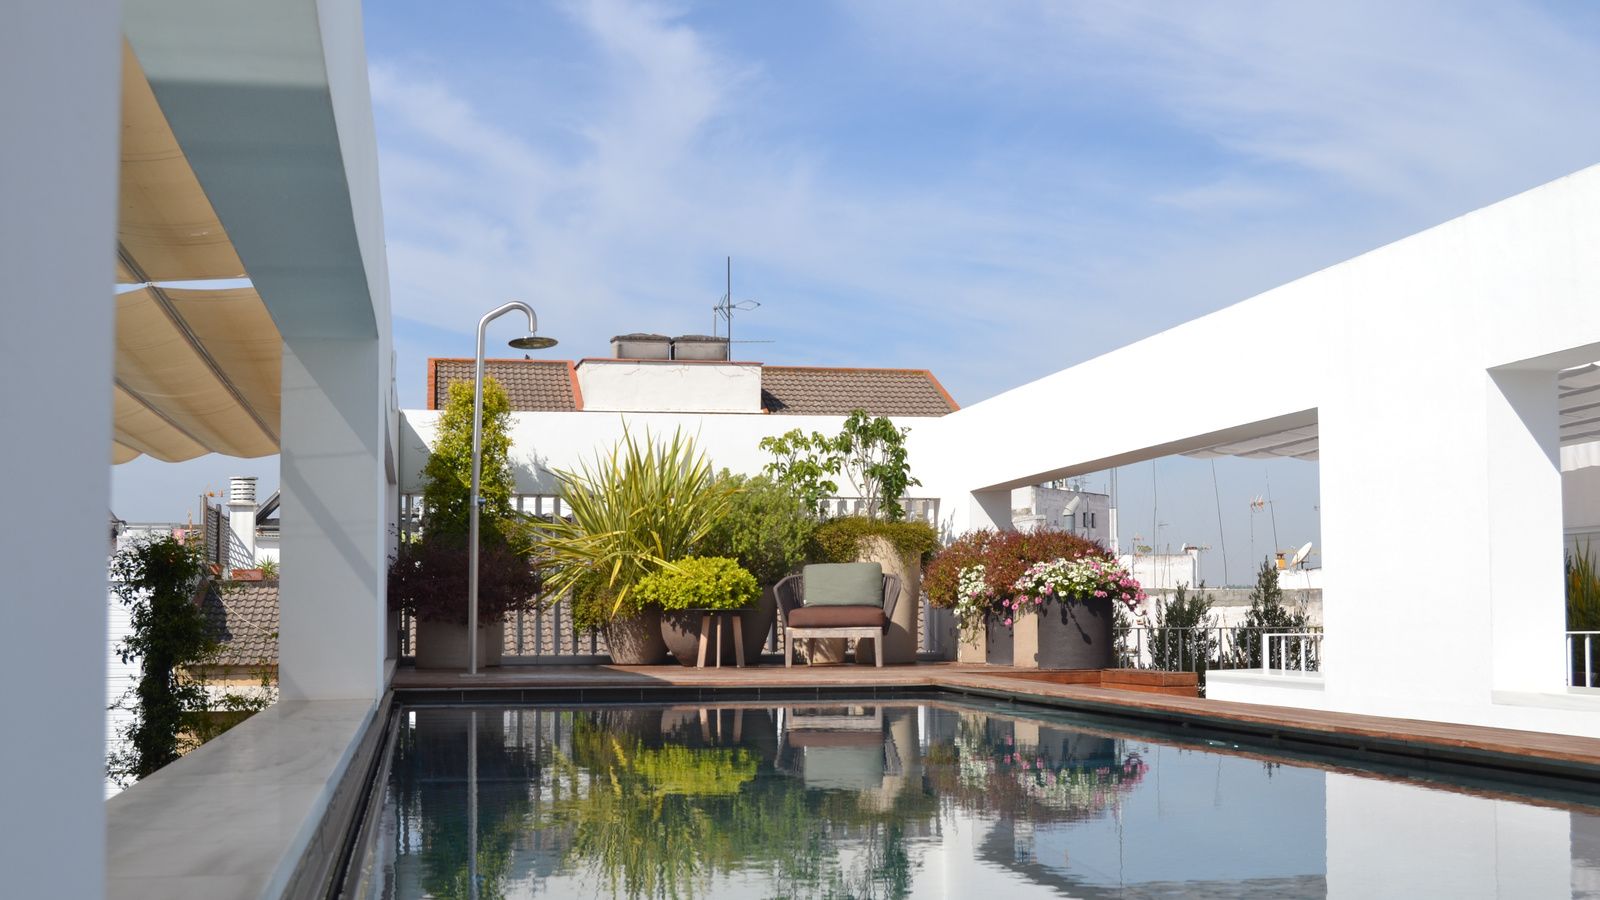 Hotel Mercer Sevilla rooftop and pool overlooking the Arenal District